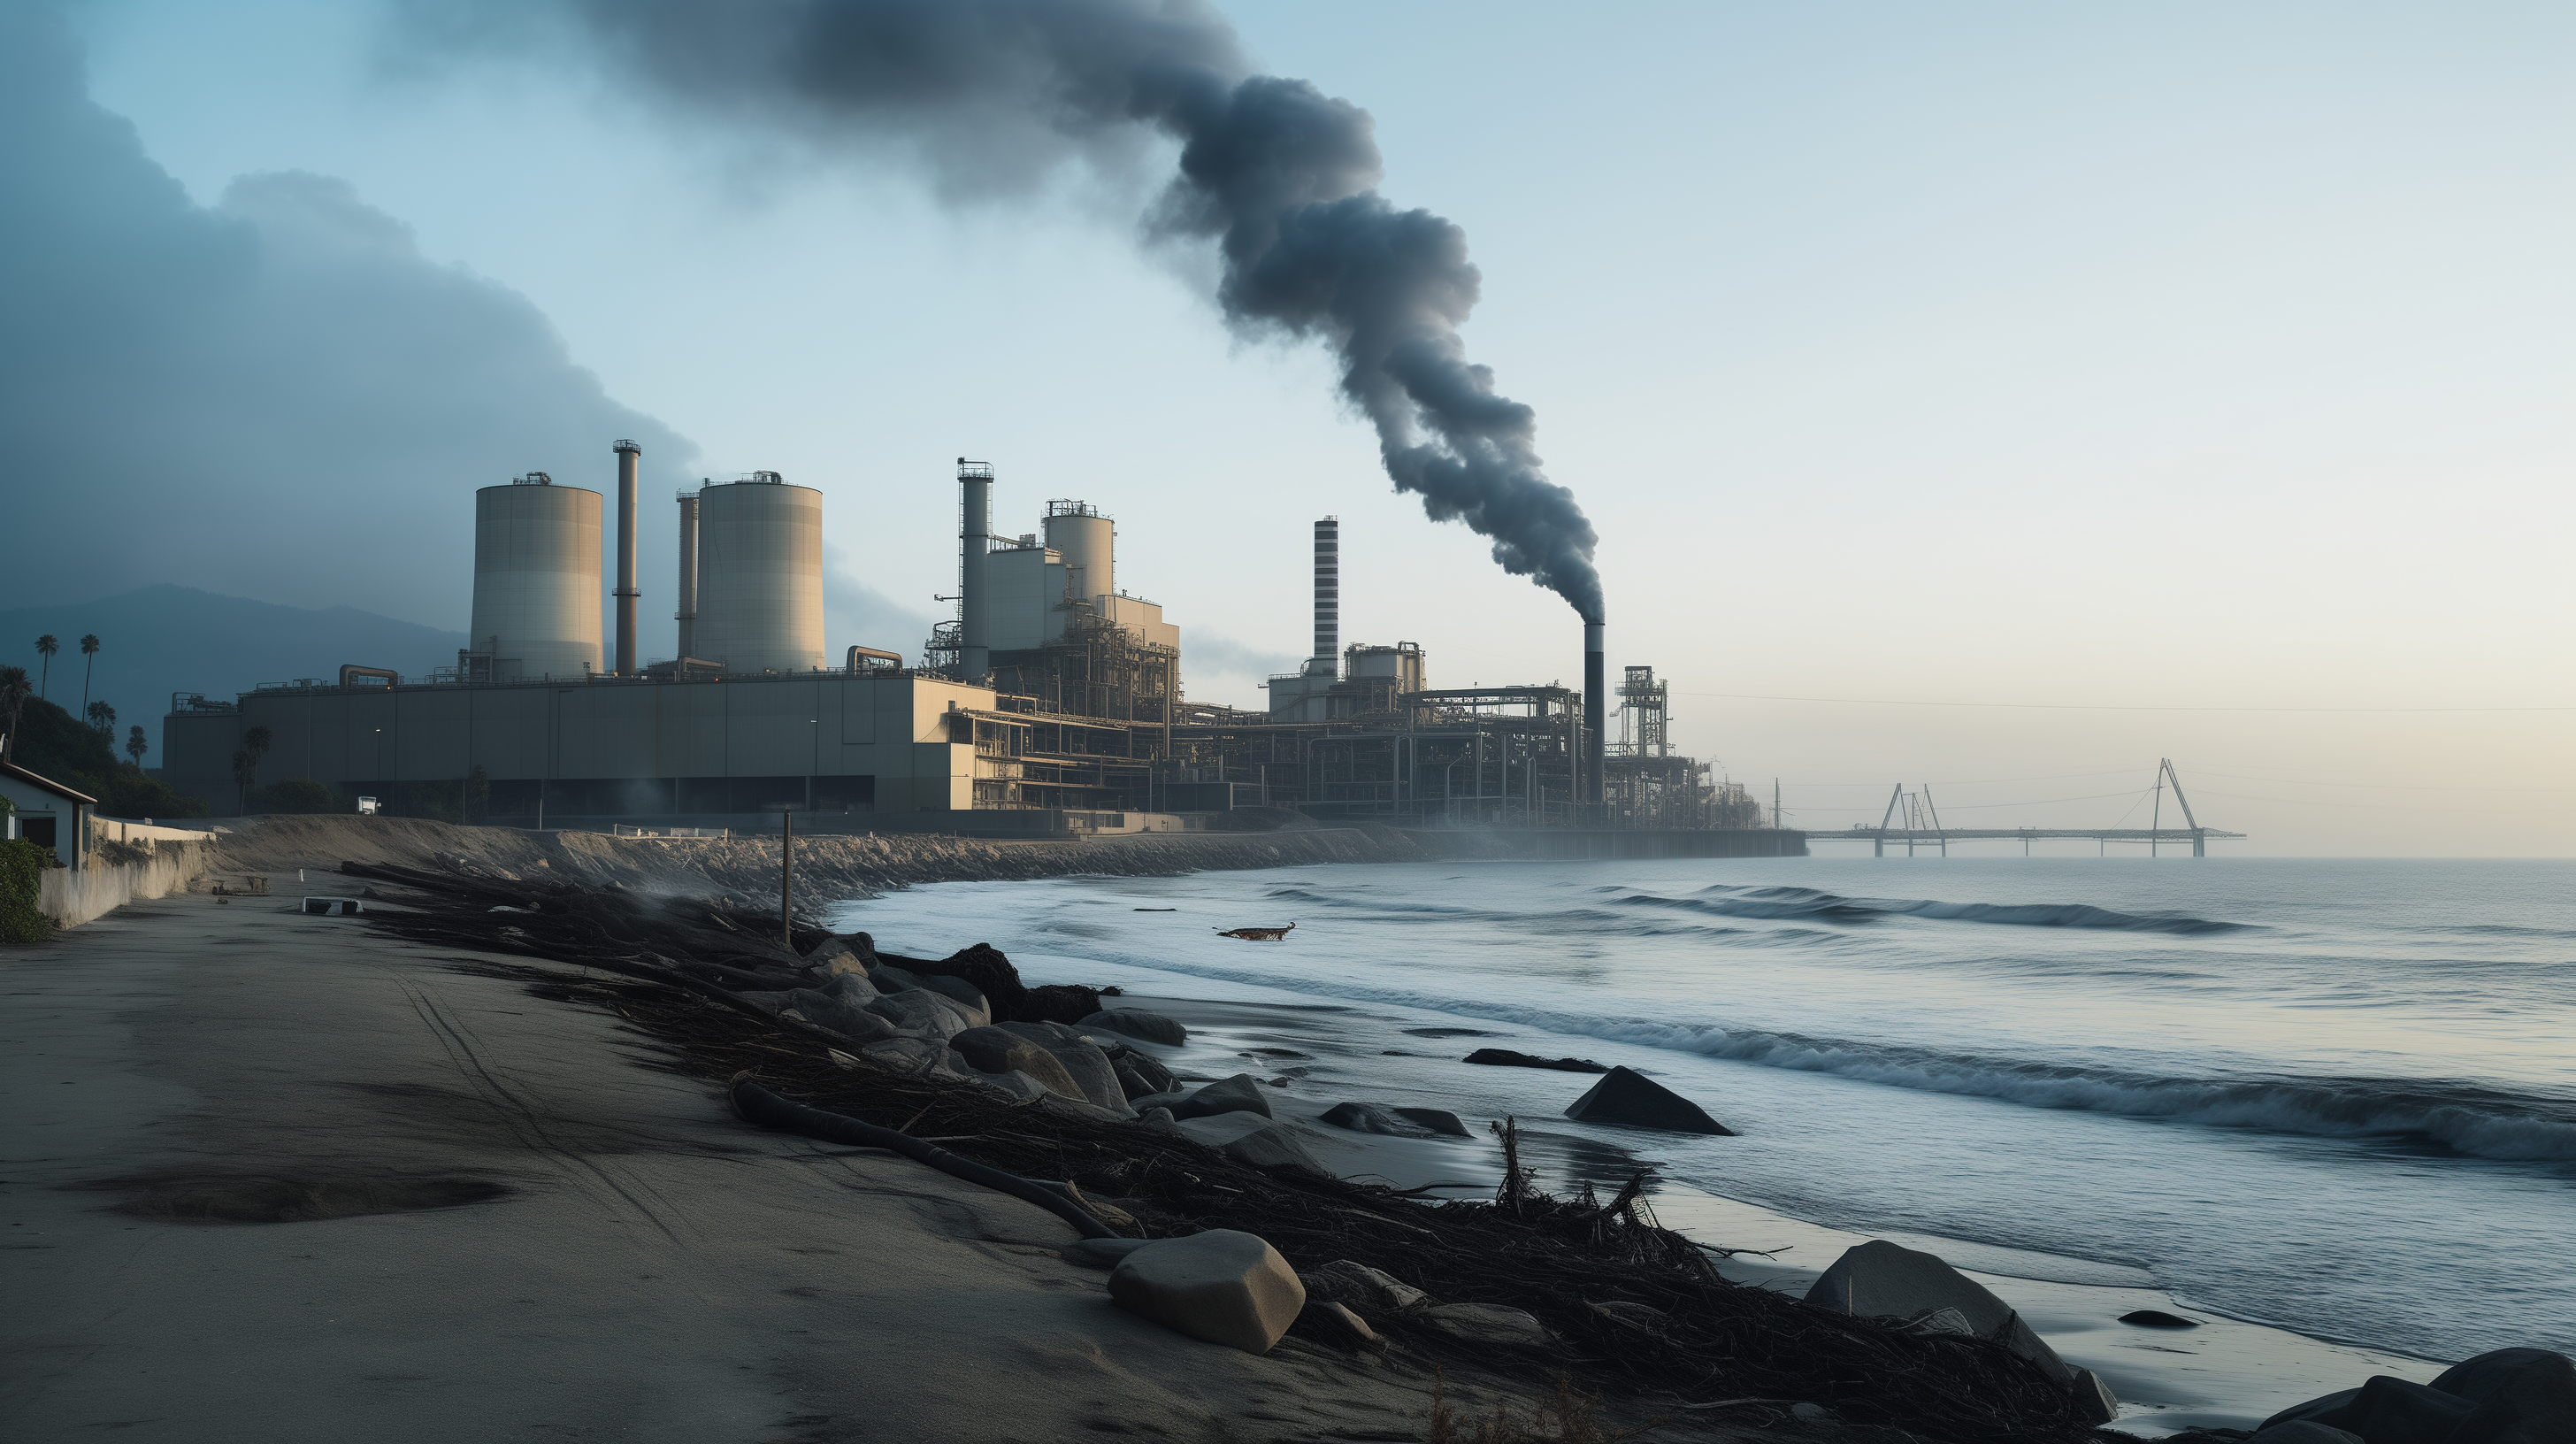 A photo of an industrial plant on a beach side